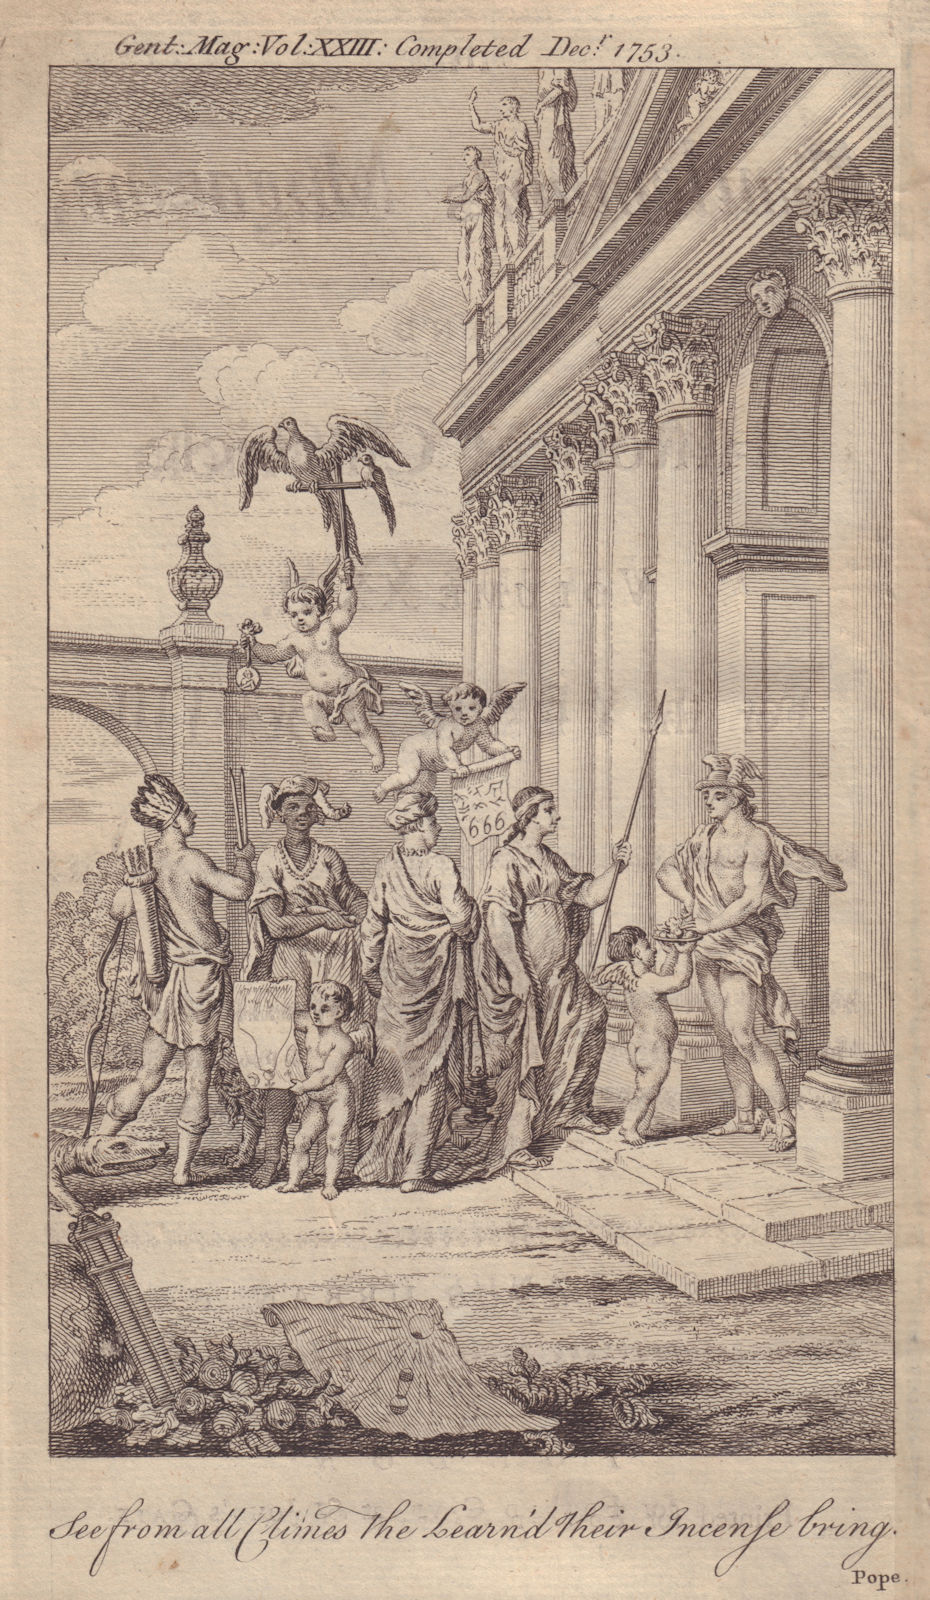 Gents mag title. See from all Climes The Learn'd Their Incense bring. Pope 1753